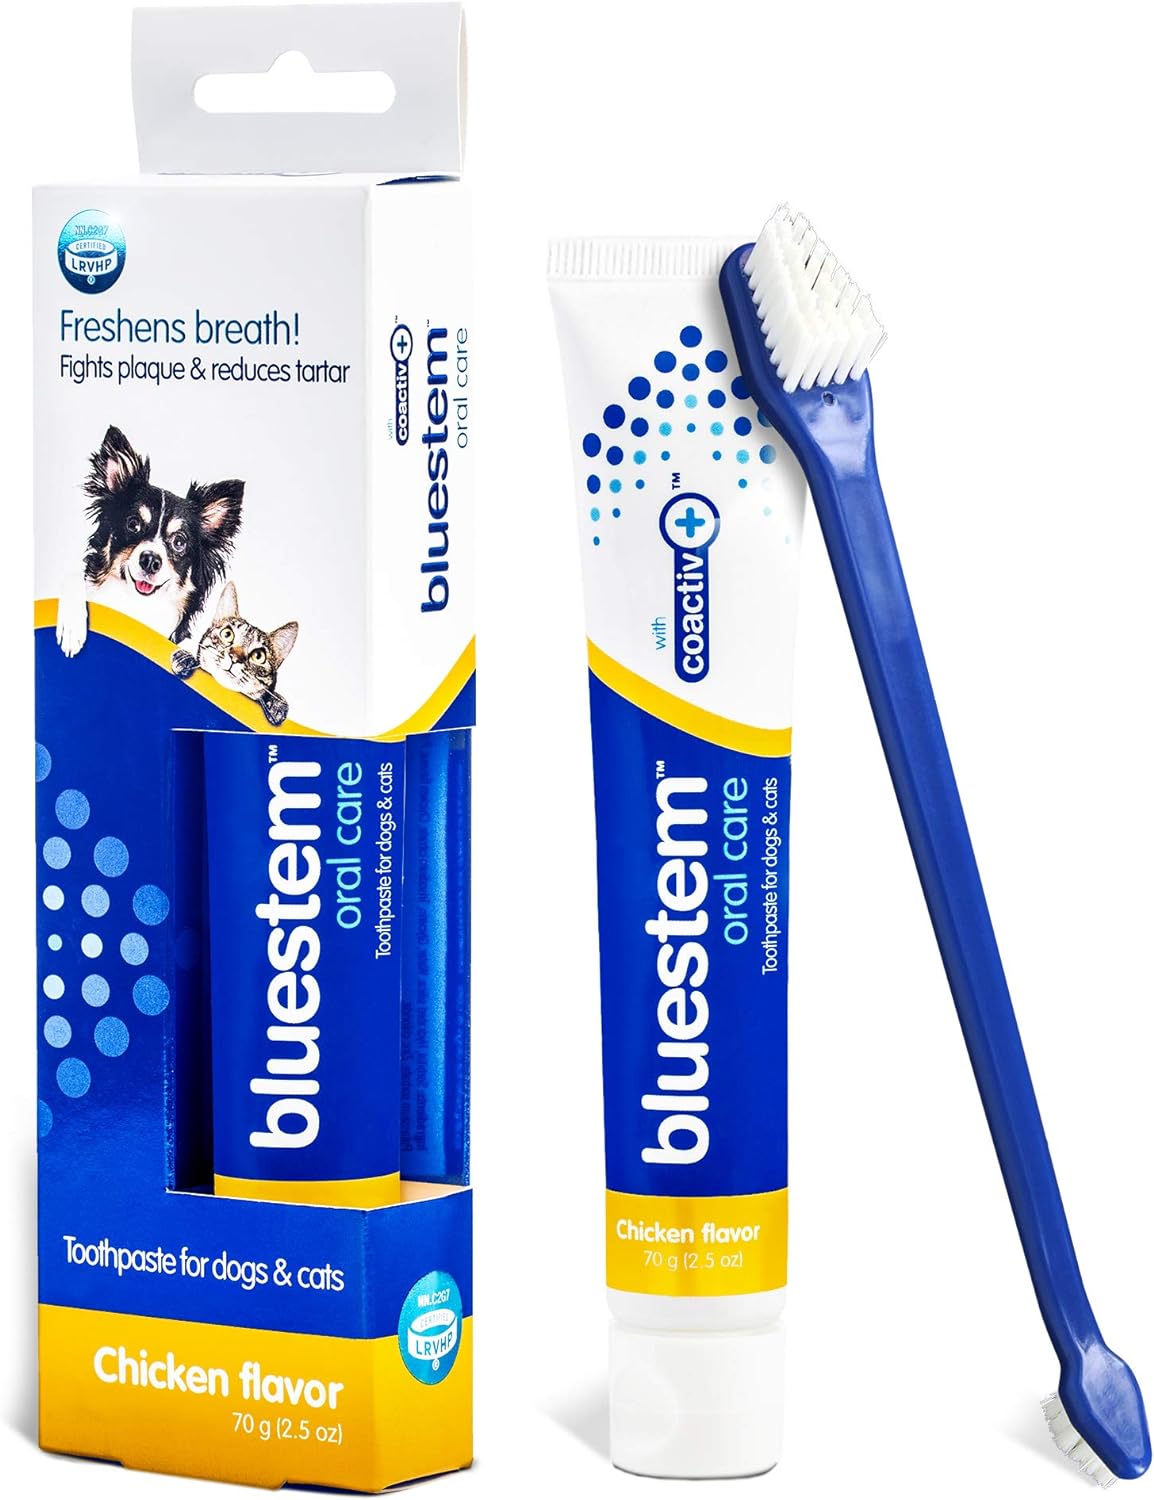 Dog Toothbrush and Toothpaste : Chicken Flavor Tooth Paste with Tooth Brush for Dogs & Cats. Teeth Brushing Cleaner Pet Breath Freshener Oral Care Dental Cleaning Kit. Tartar & Plaque Remover Brushes